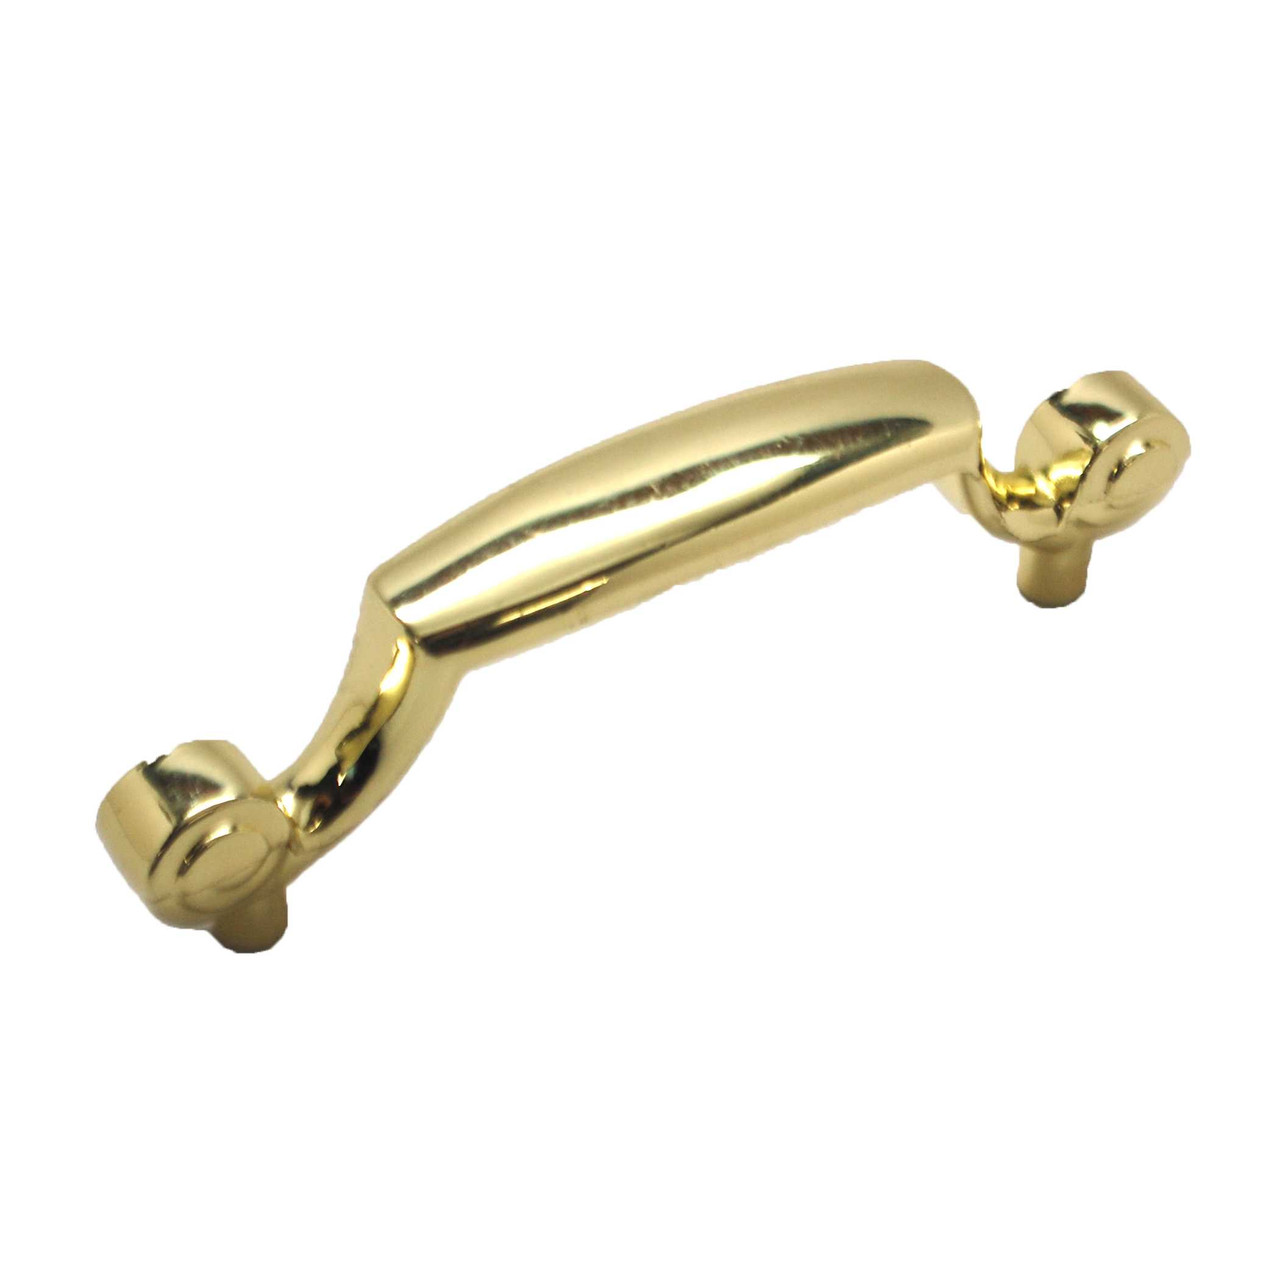 https://cdn11.bigcommerce.com/s-1xpphv/images/stencil/1280x1280/products/986/14712/BELWITH-3-Center-to-Center-Handle-Cabinet-Pull-Polished-Brass-P537-PB_6668__85372.1674495490.JPG?c=2